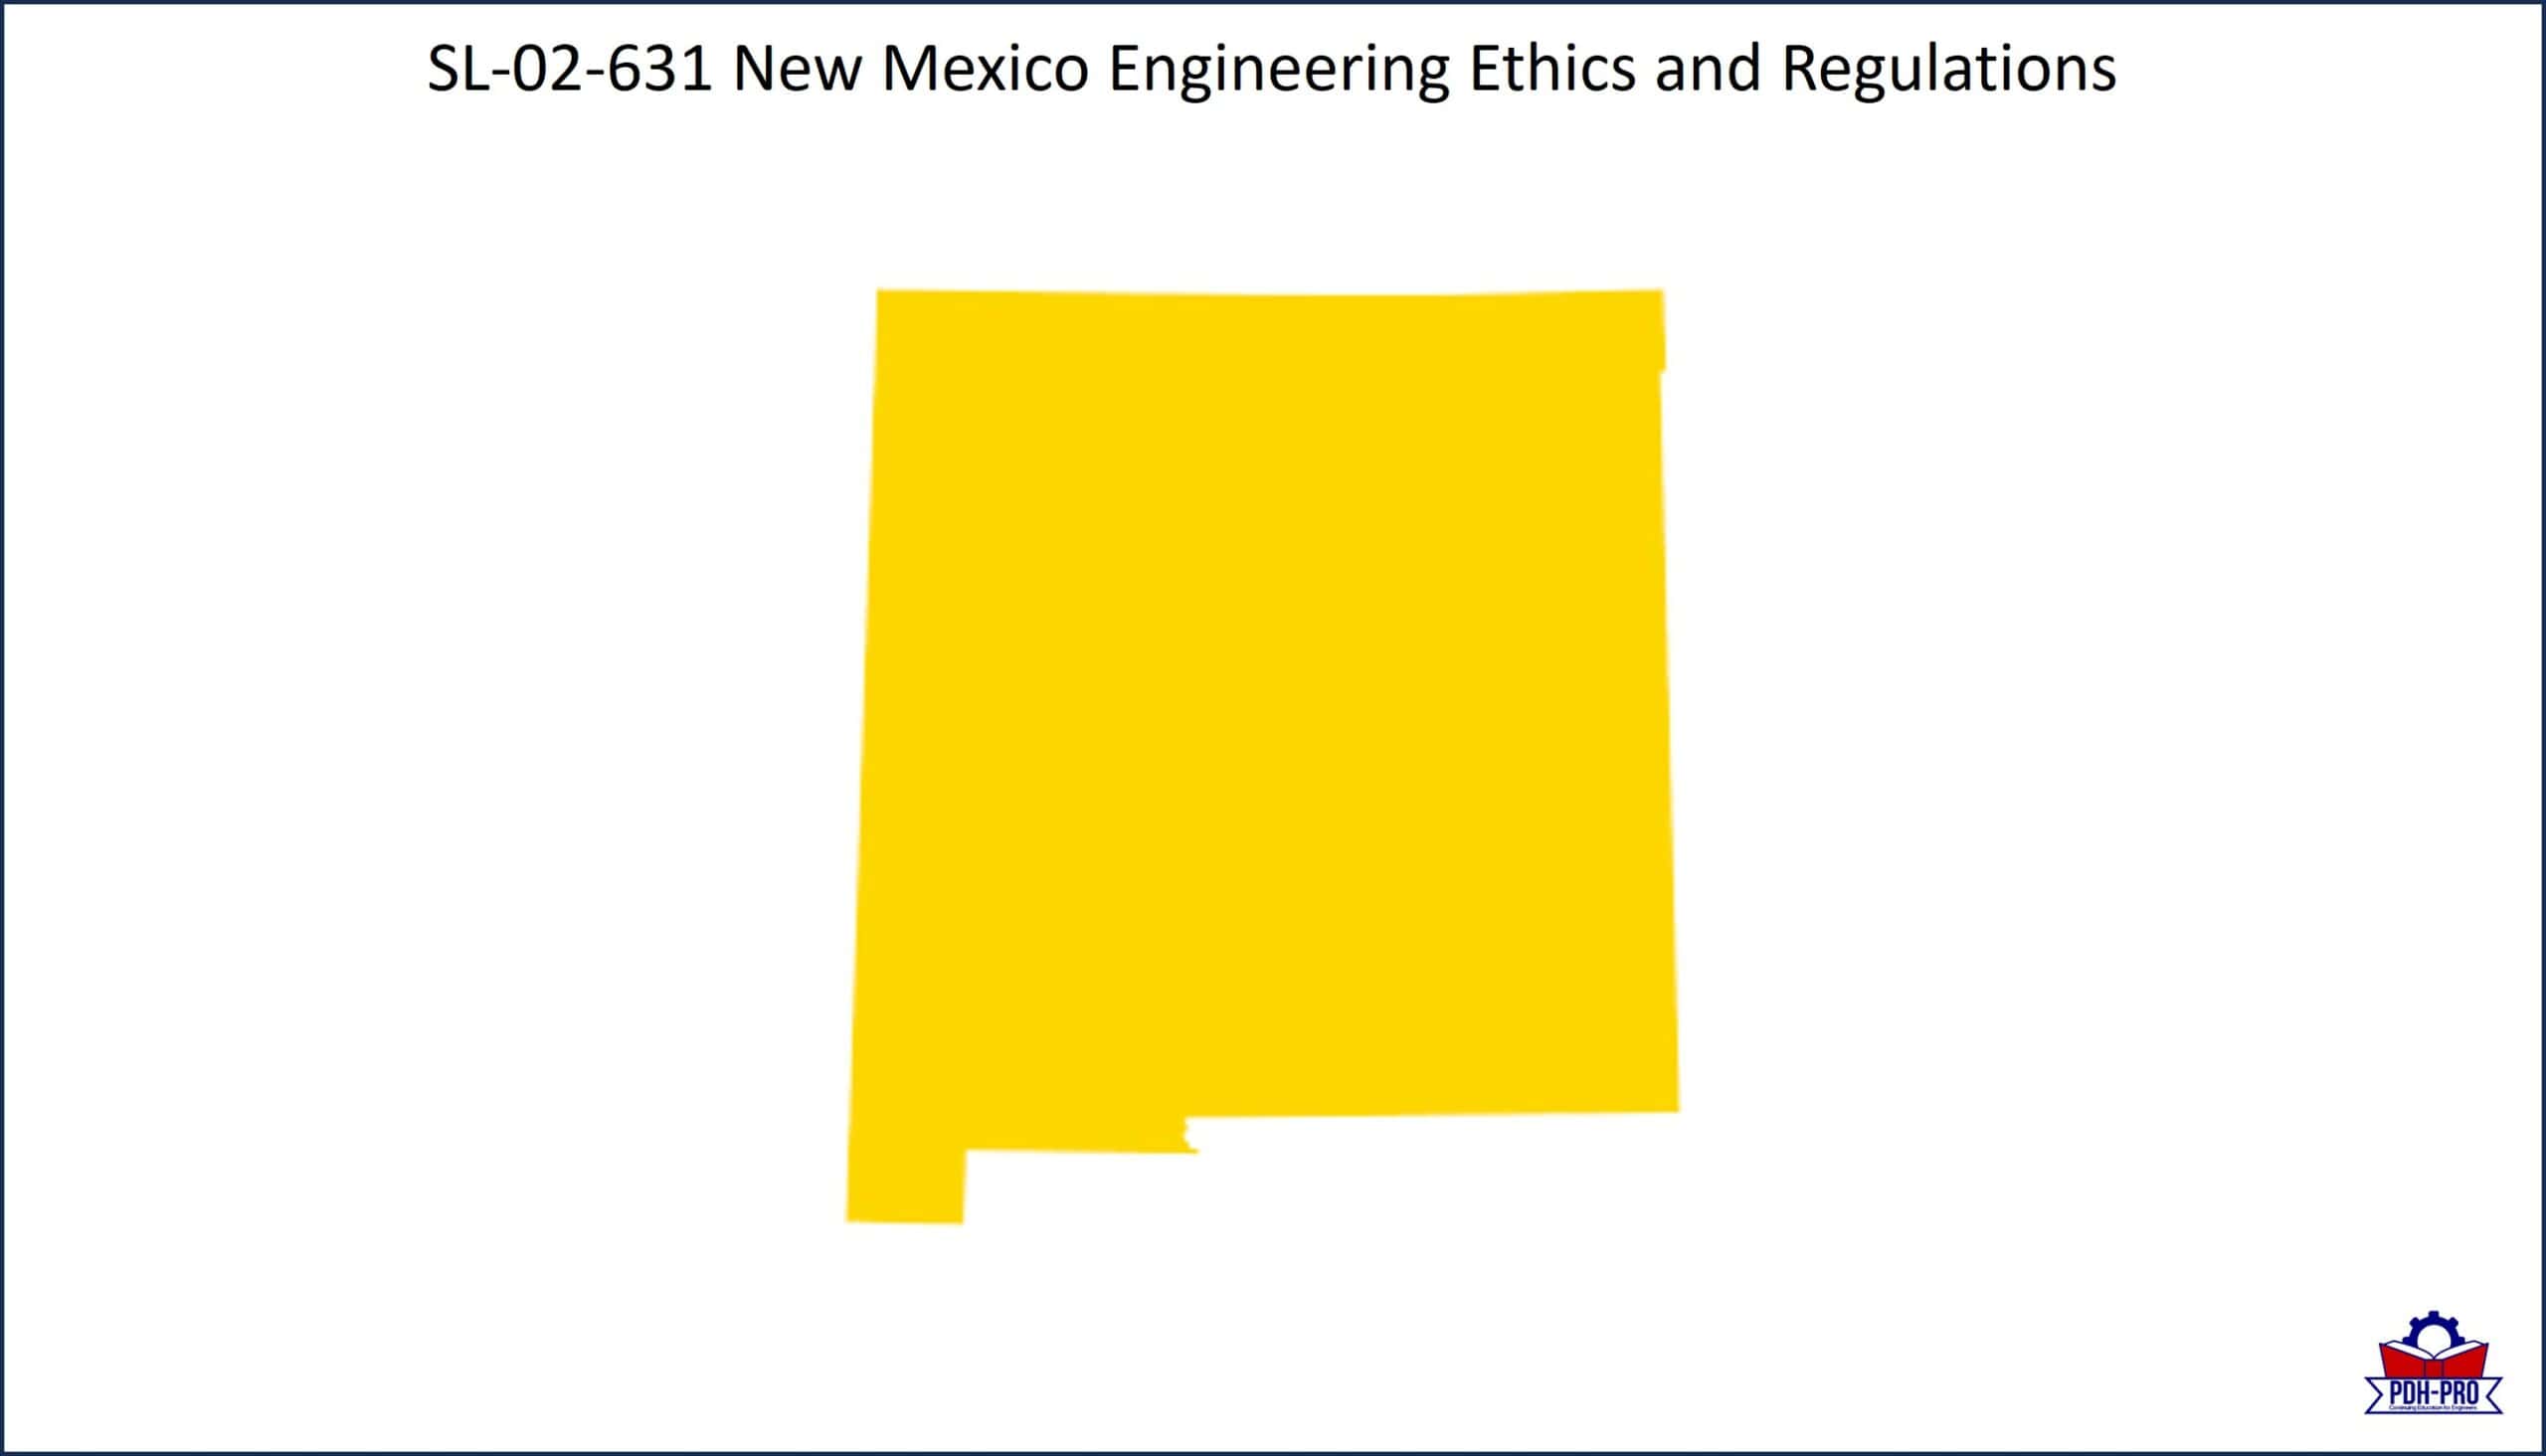 New Mexico Engineering Ethics and Regulations